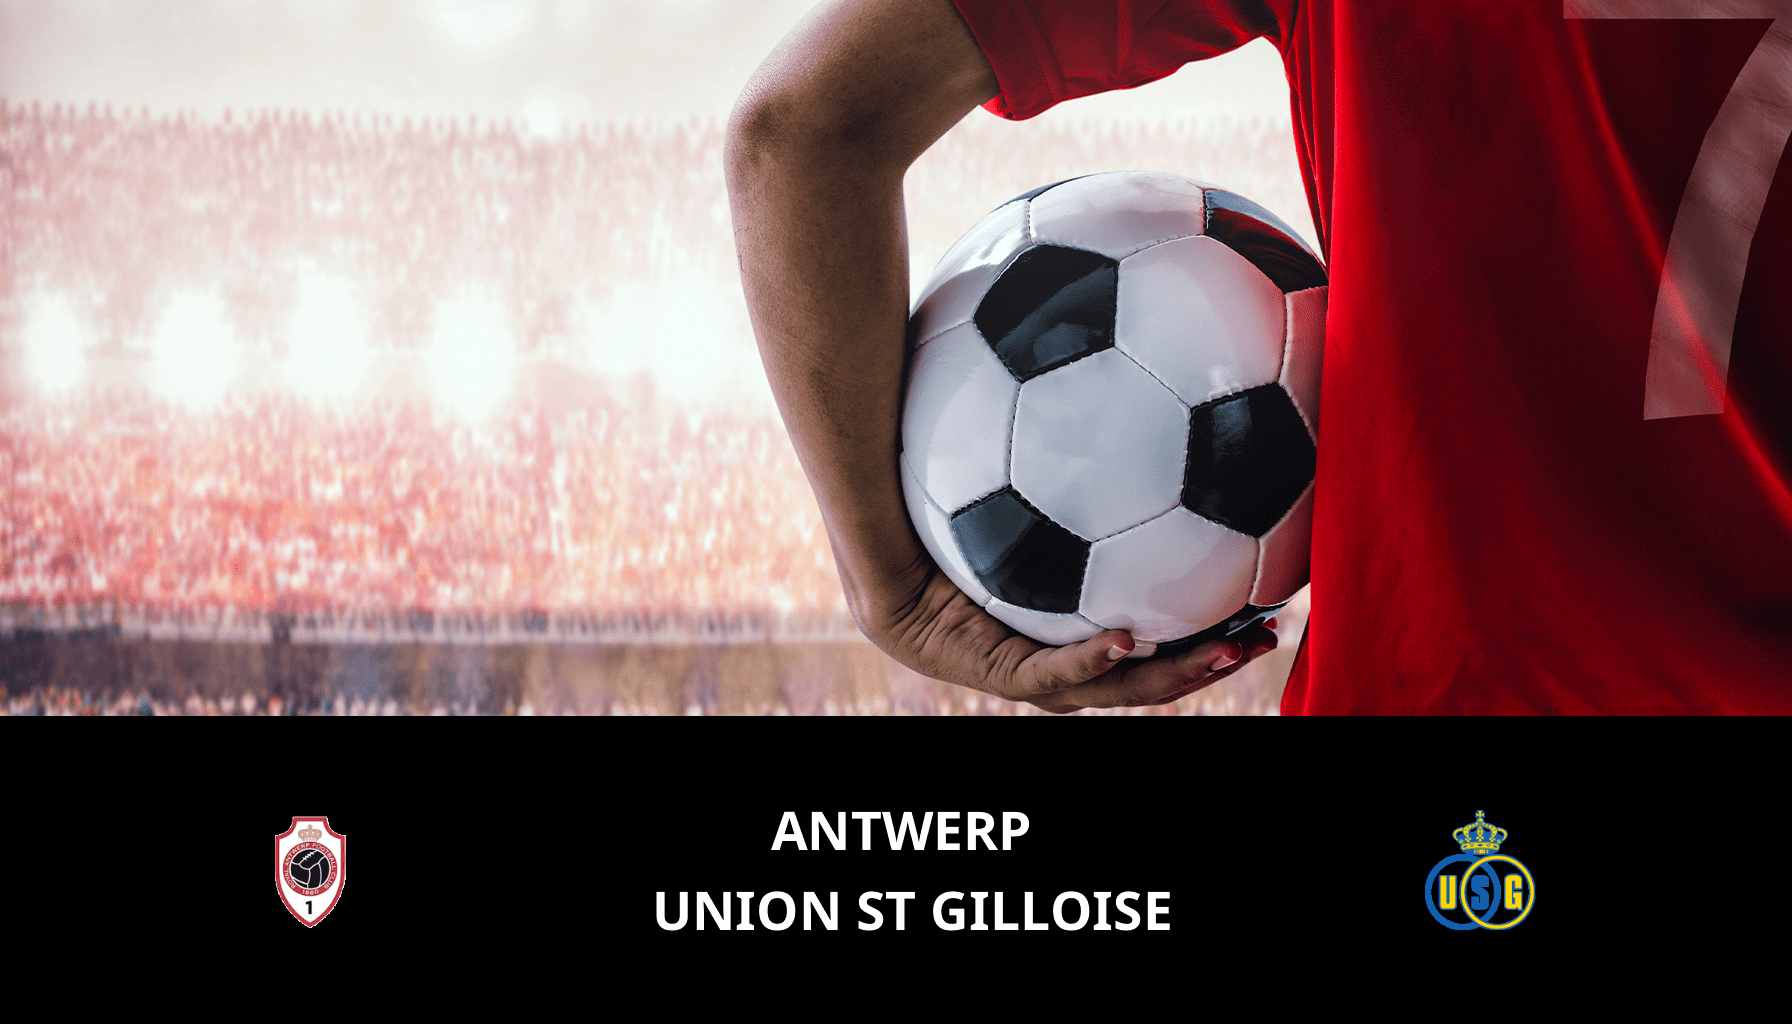 Previsione per Antwerp VS Union St Gilloise il 25/04/2024 Analysis of the match